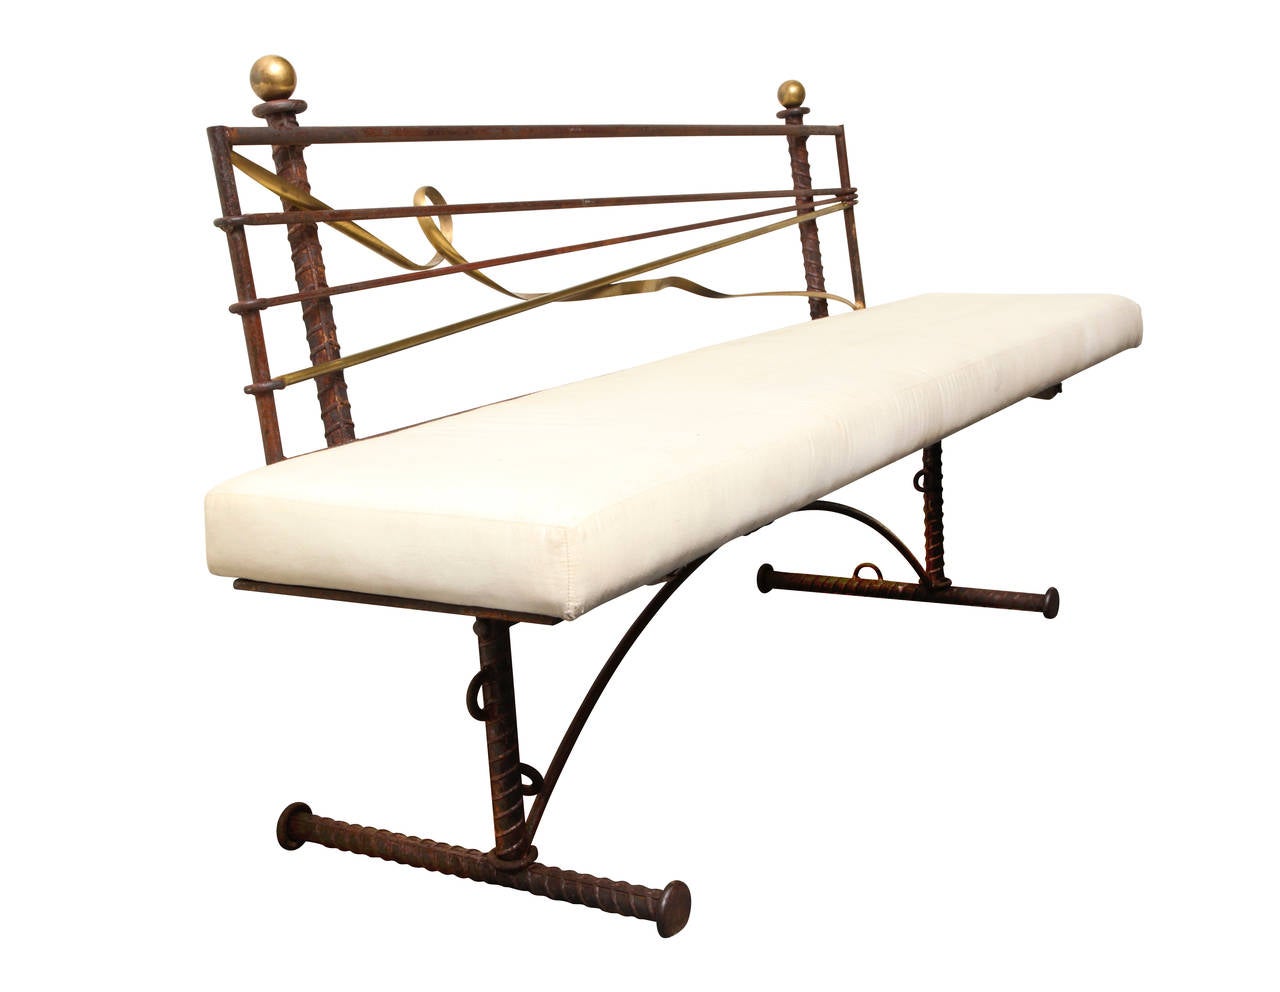 A pair of forged and wrought iron Brutalist Style benches. The bases in the form of a rectangular iron frame with vertical supports having a horizontal bar with arched center stretcher supporting attached upholstered tight seat. Bench back formed by